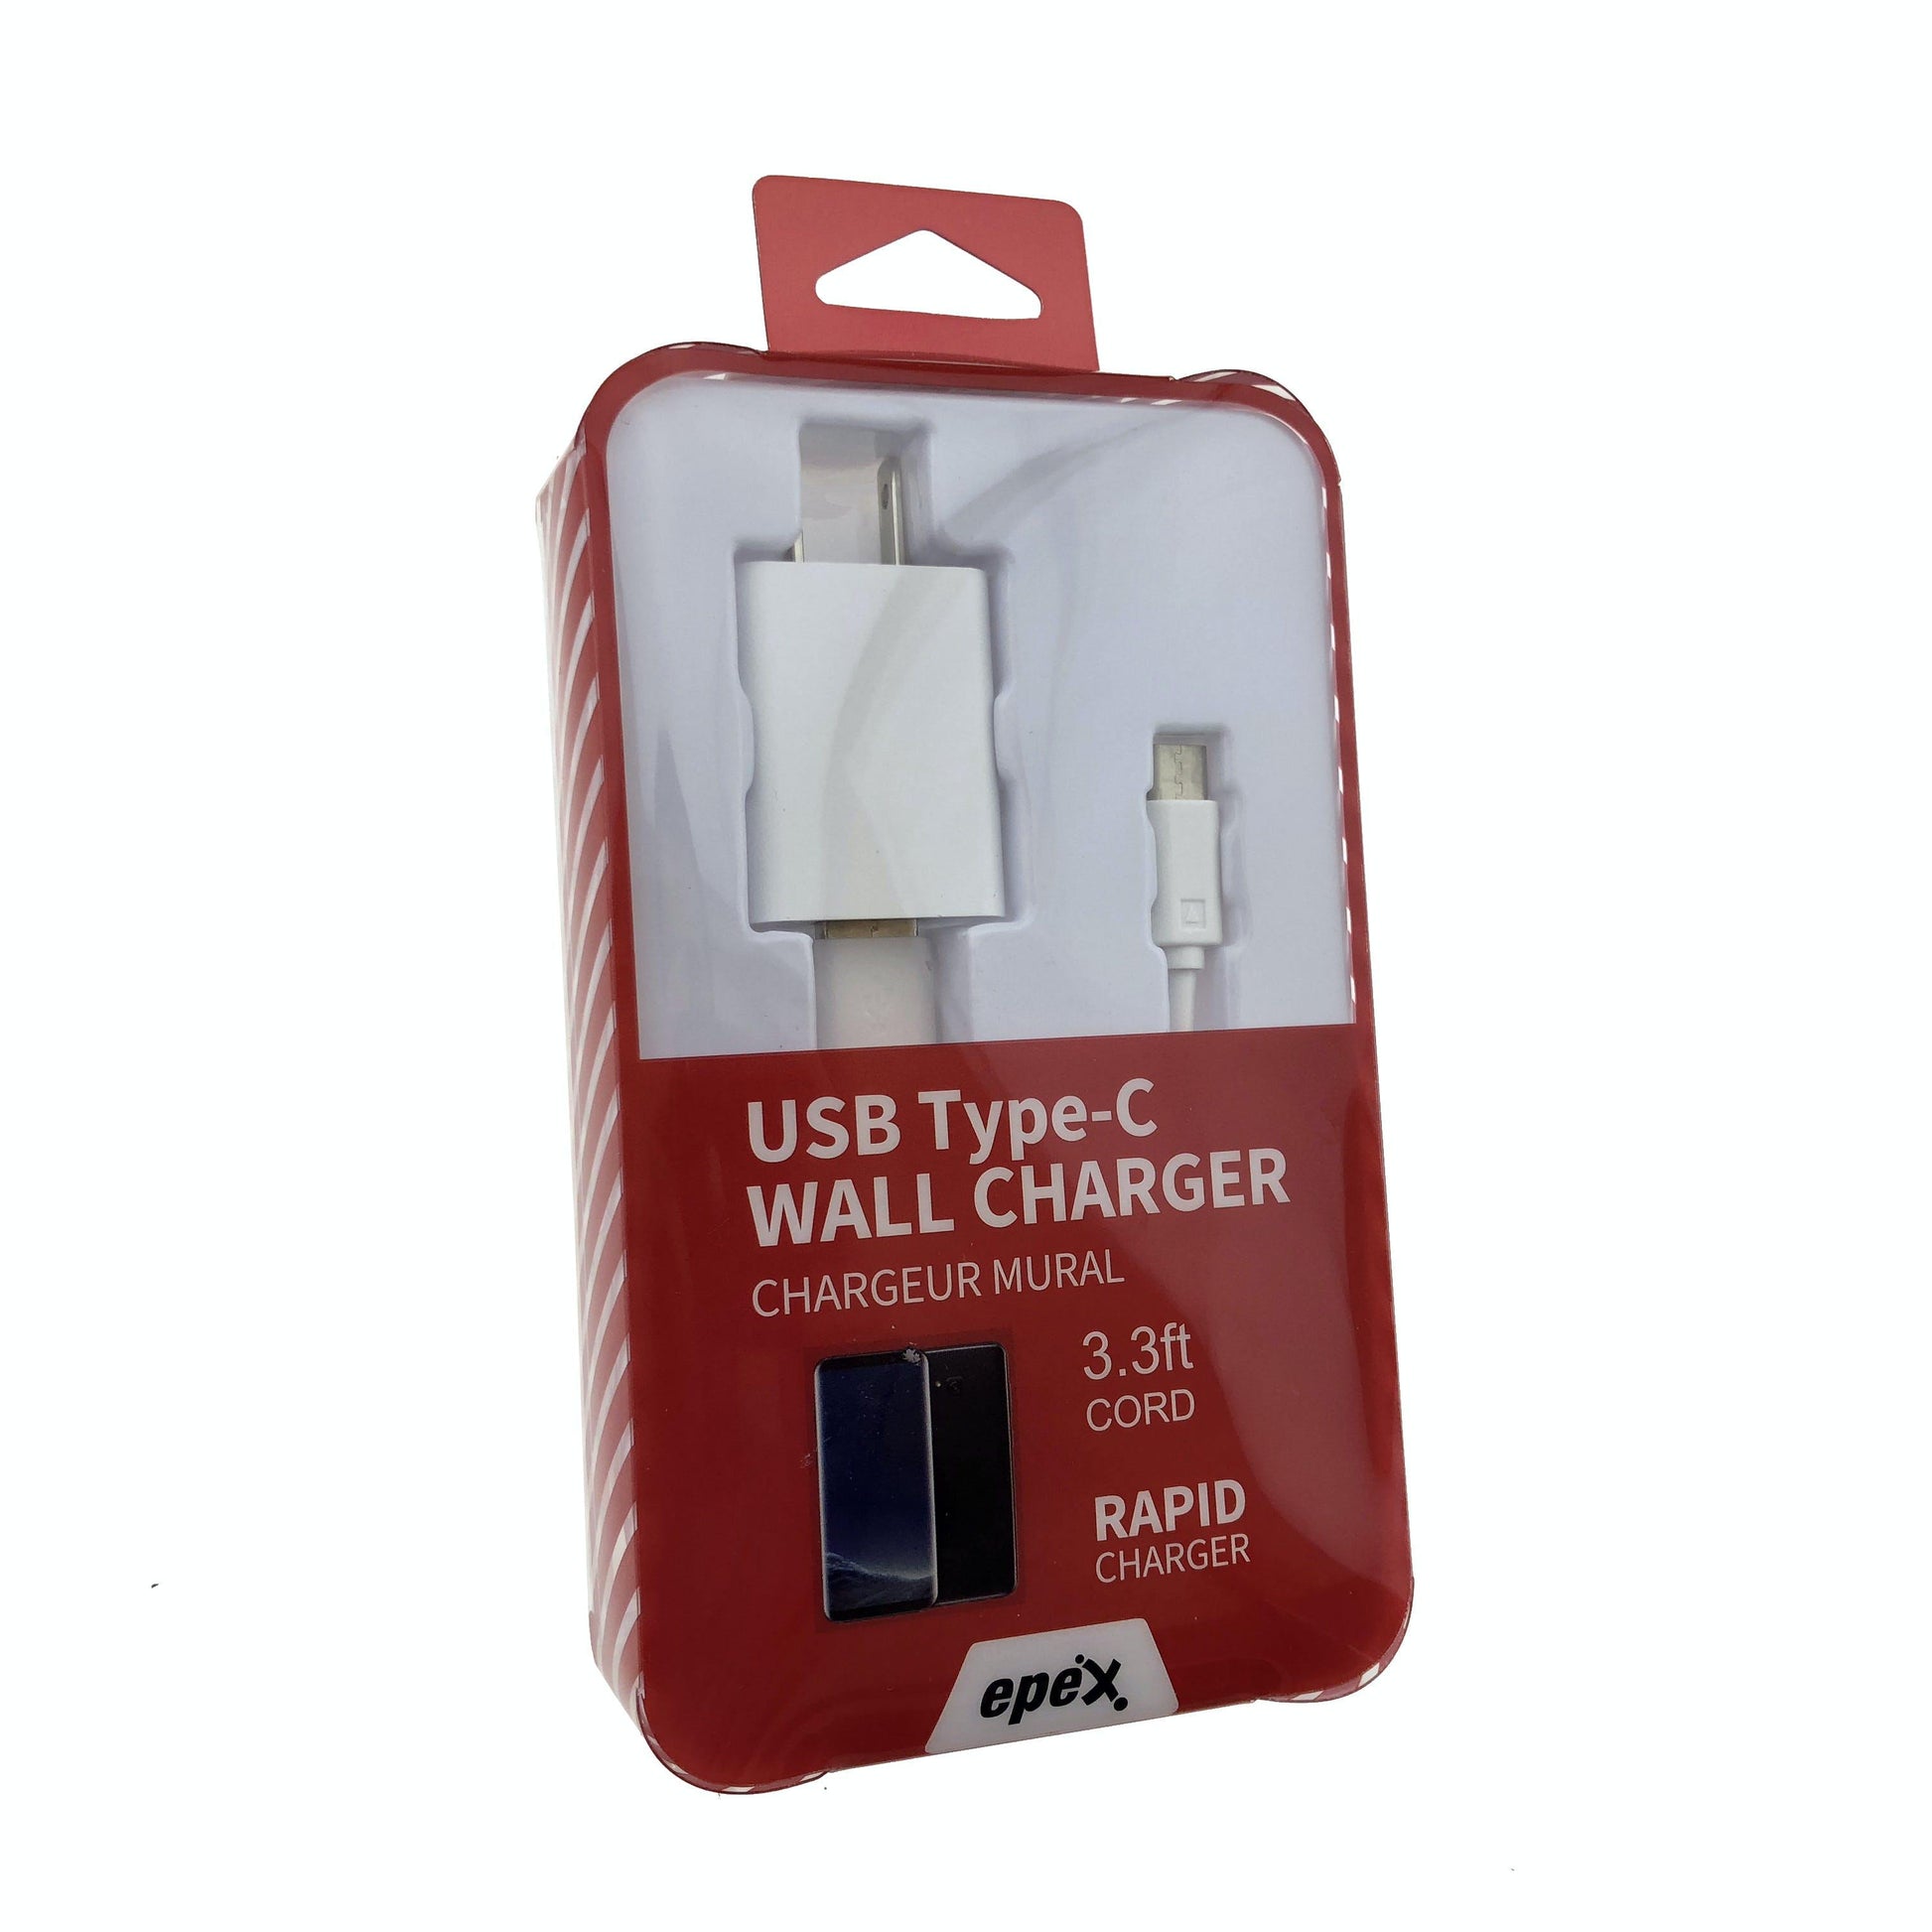 USB Type-C Cable Wall Charger - PCMaster Pro 